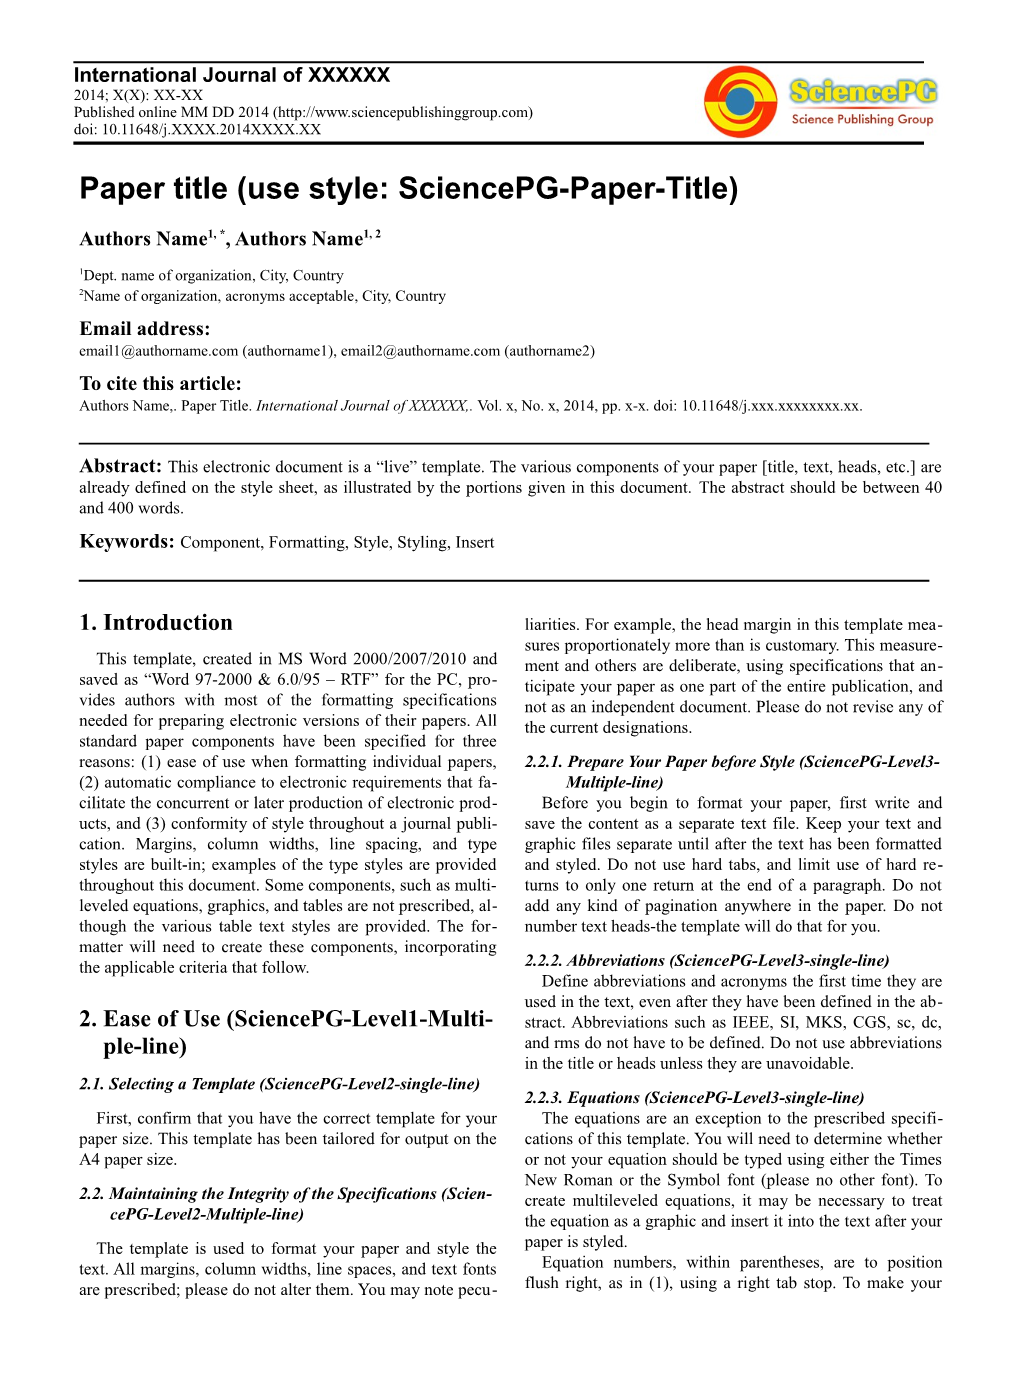 Paper Title (Use Style: Sciencepg-Paper-Title)